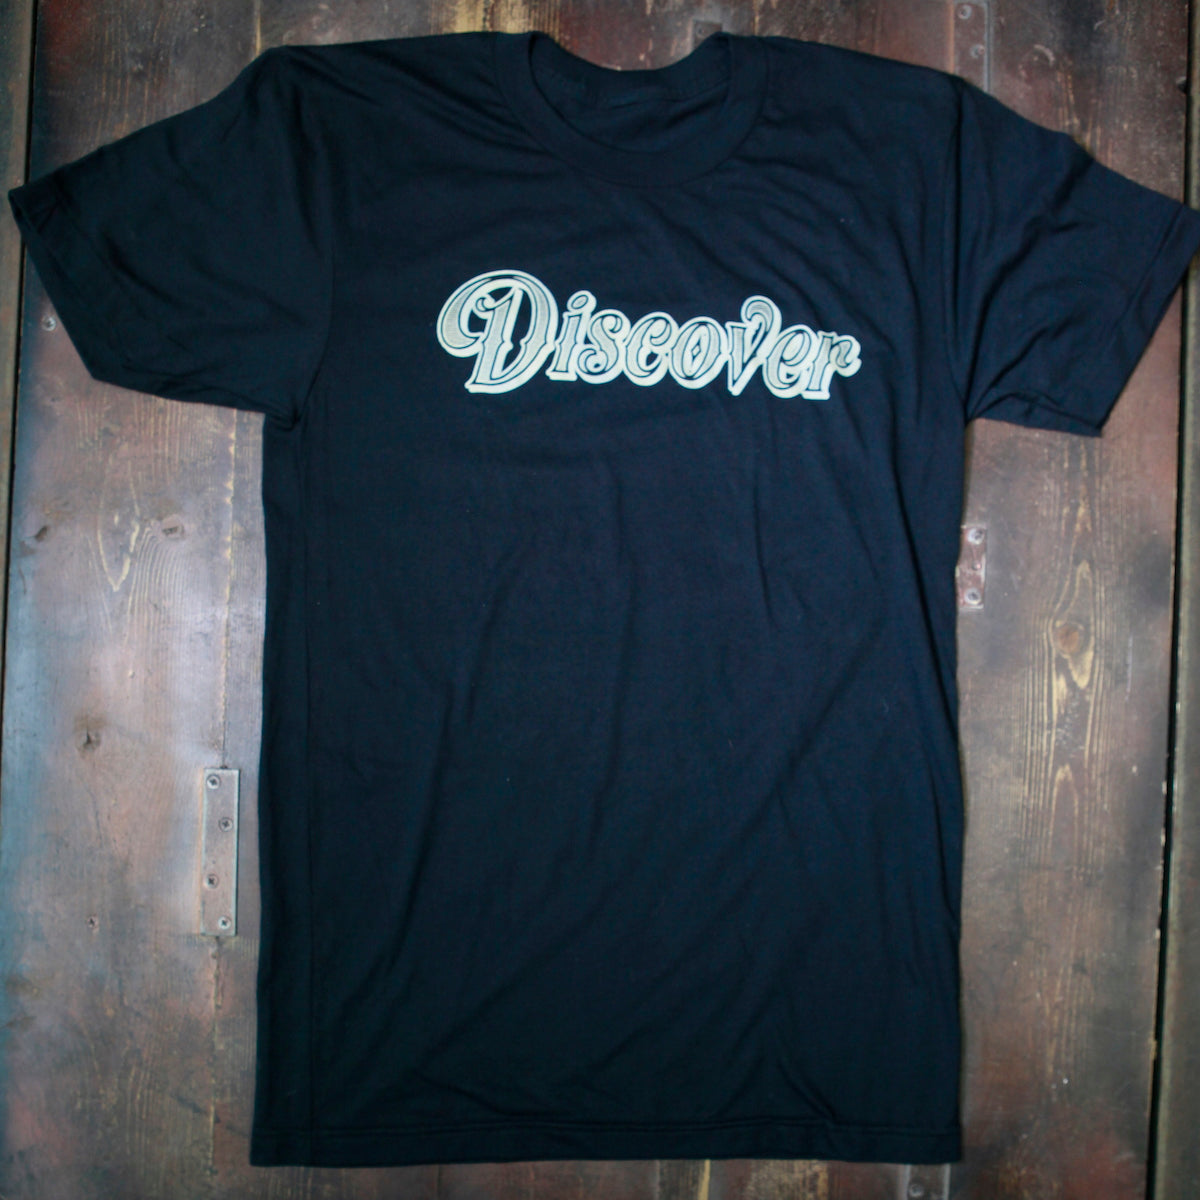 Grit Series: Discover, Tee Shirt